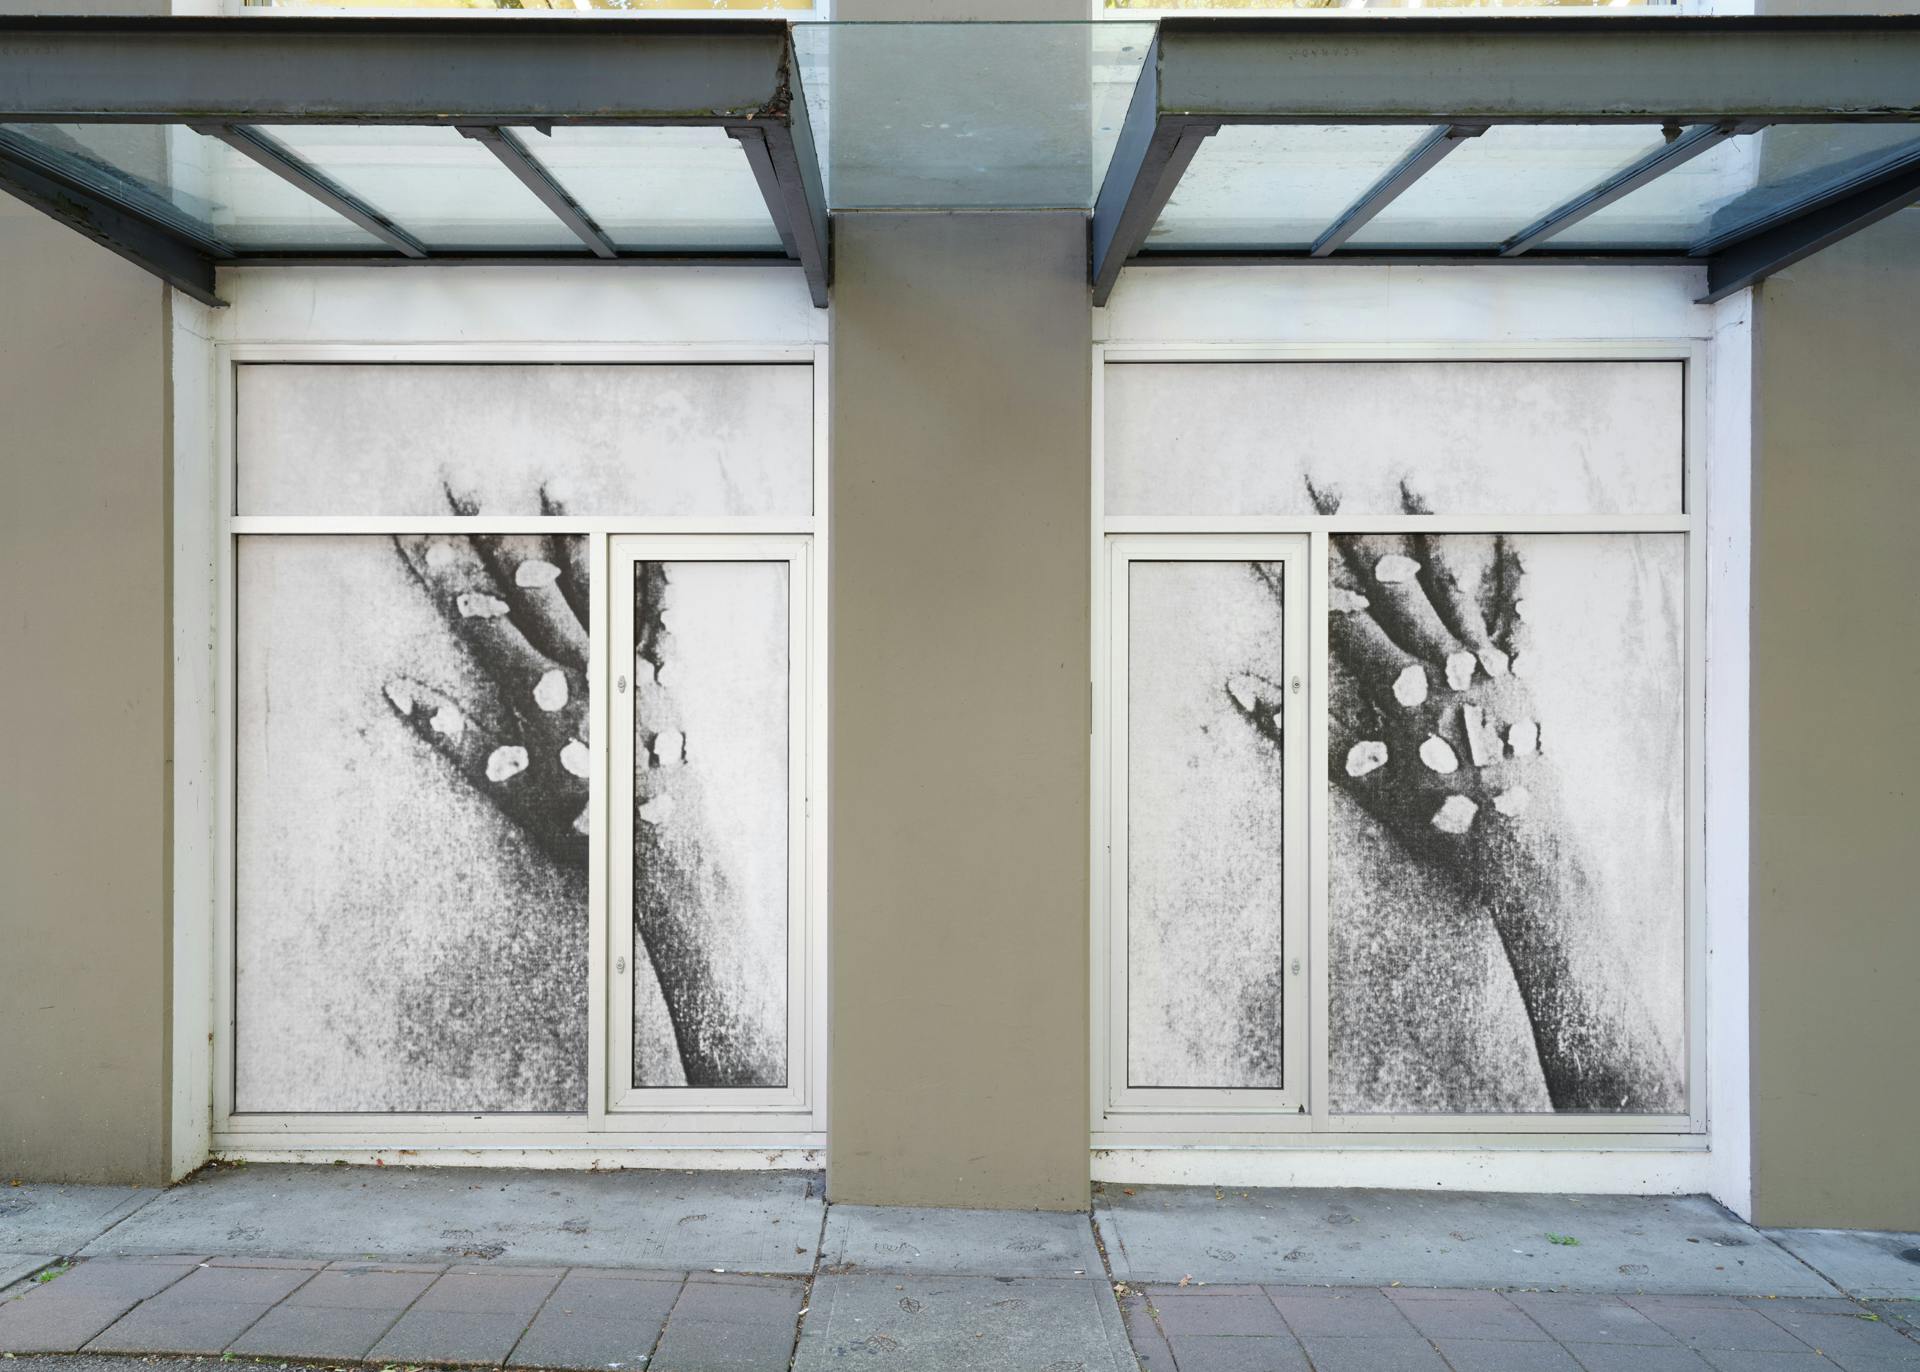 A pair of windows featuring a pair of images depicting a hand with small white pebbles placed on its joints. Both images are legible, with the right image slightly darker than the left one.